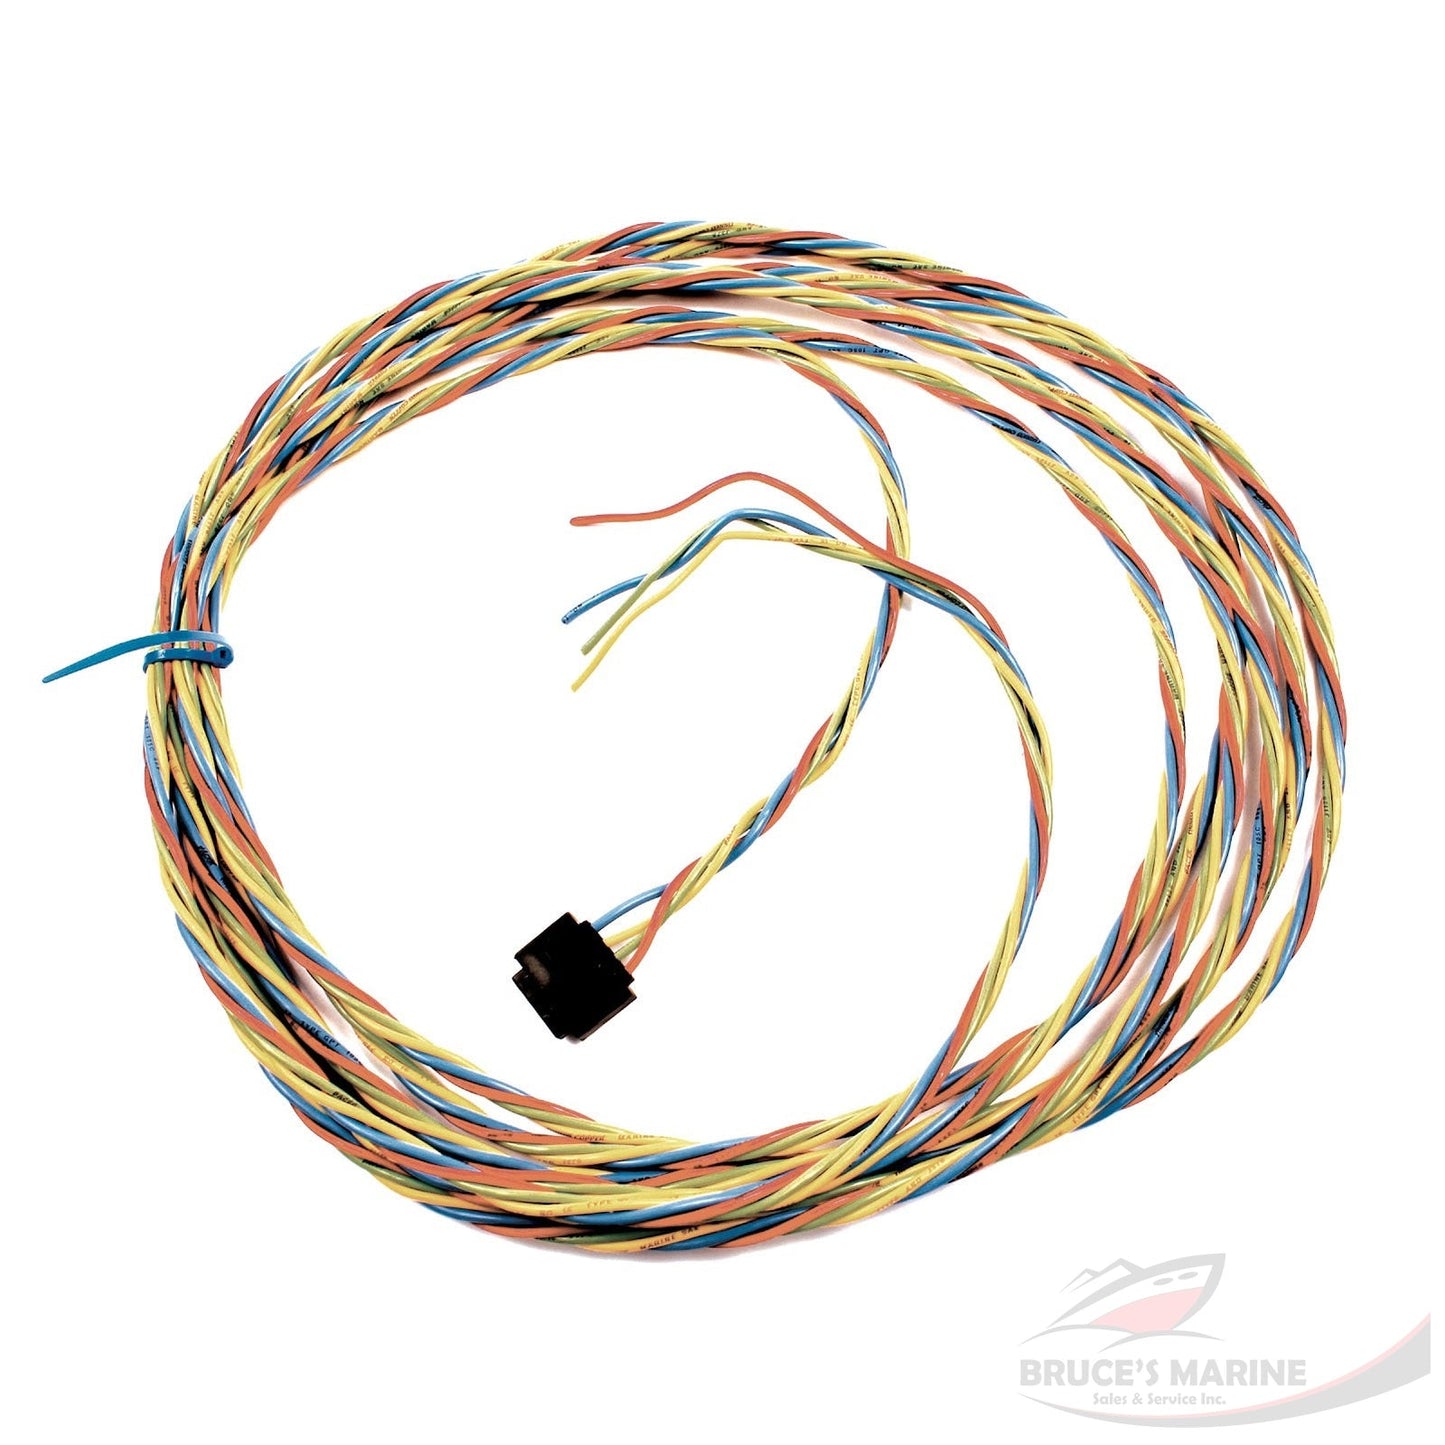 Standard 22′ Wire Harness #WH1000